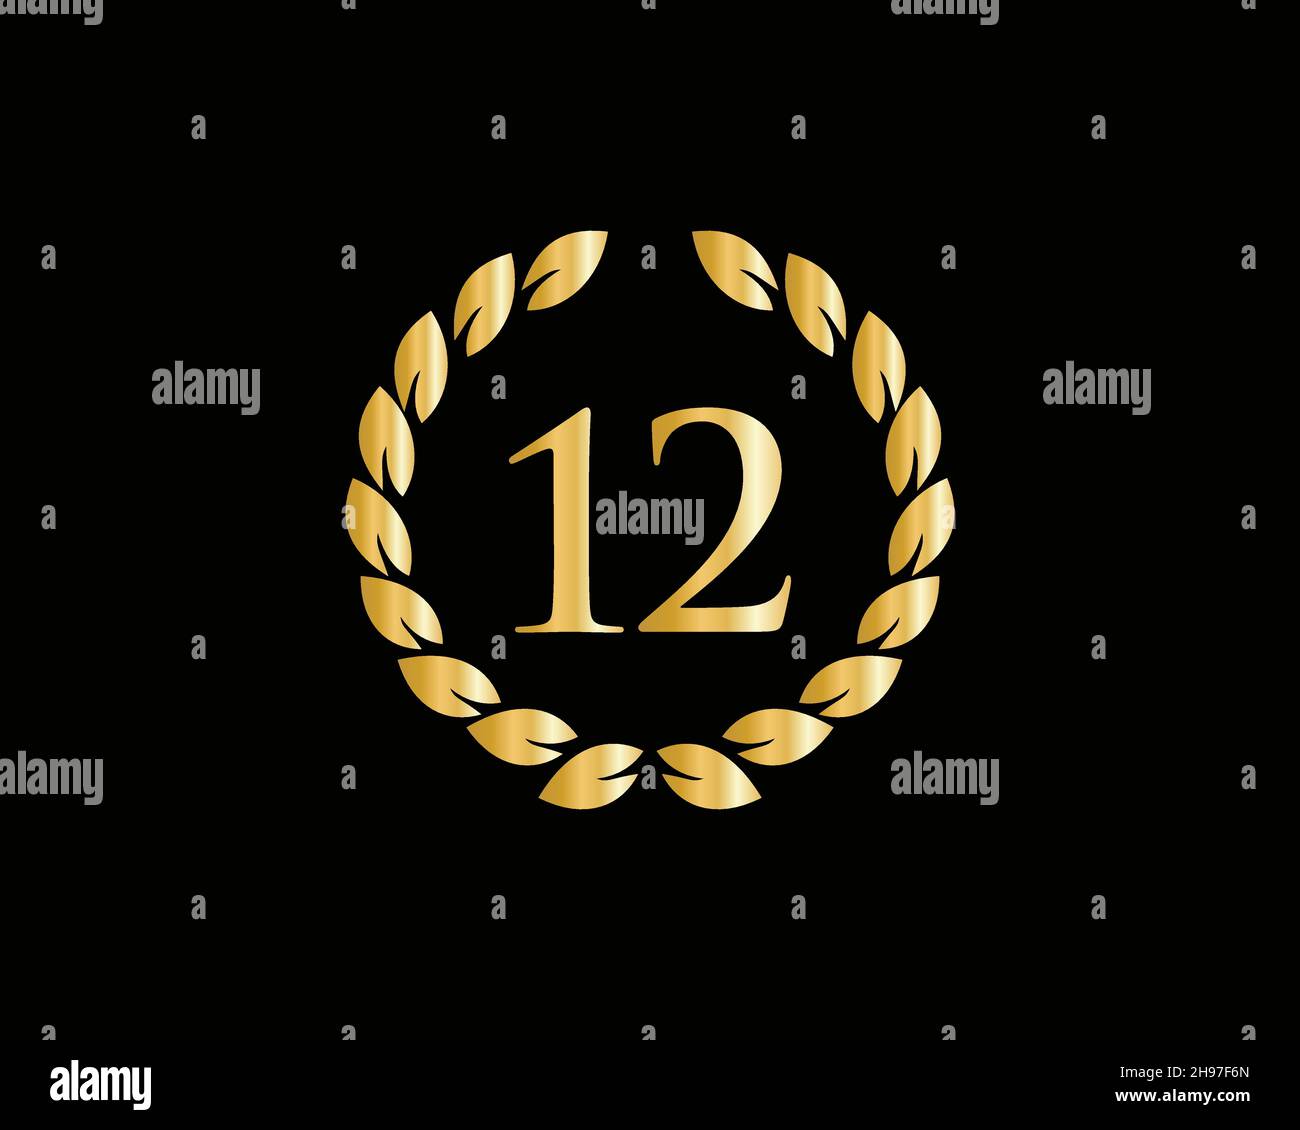 12th Anniversary Ring Logo Template. 12th Years Anniversary Logo With Golden Ring Isolated On Black Background, For Birthday, Anniversary And Company Stock Vector